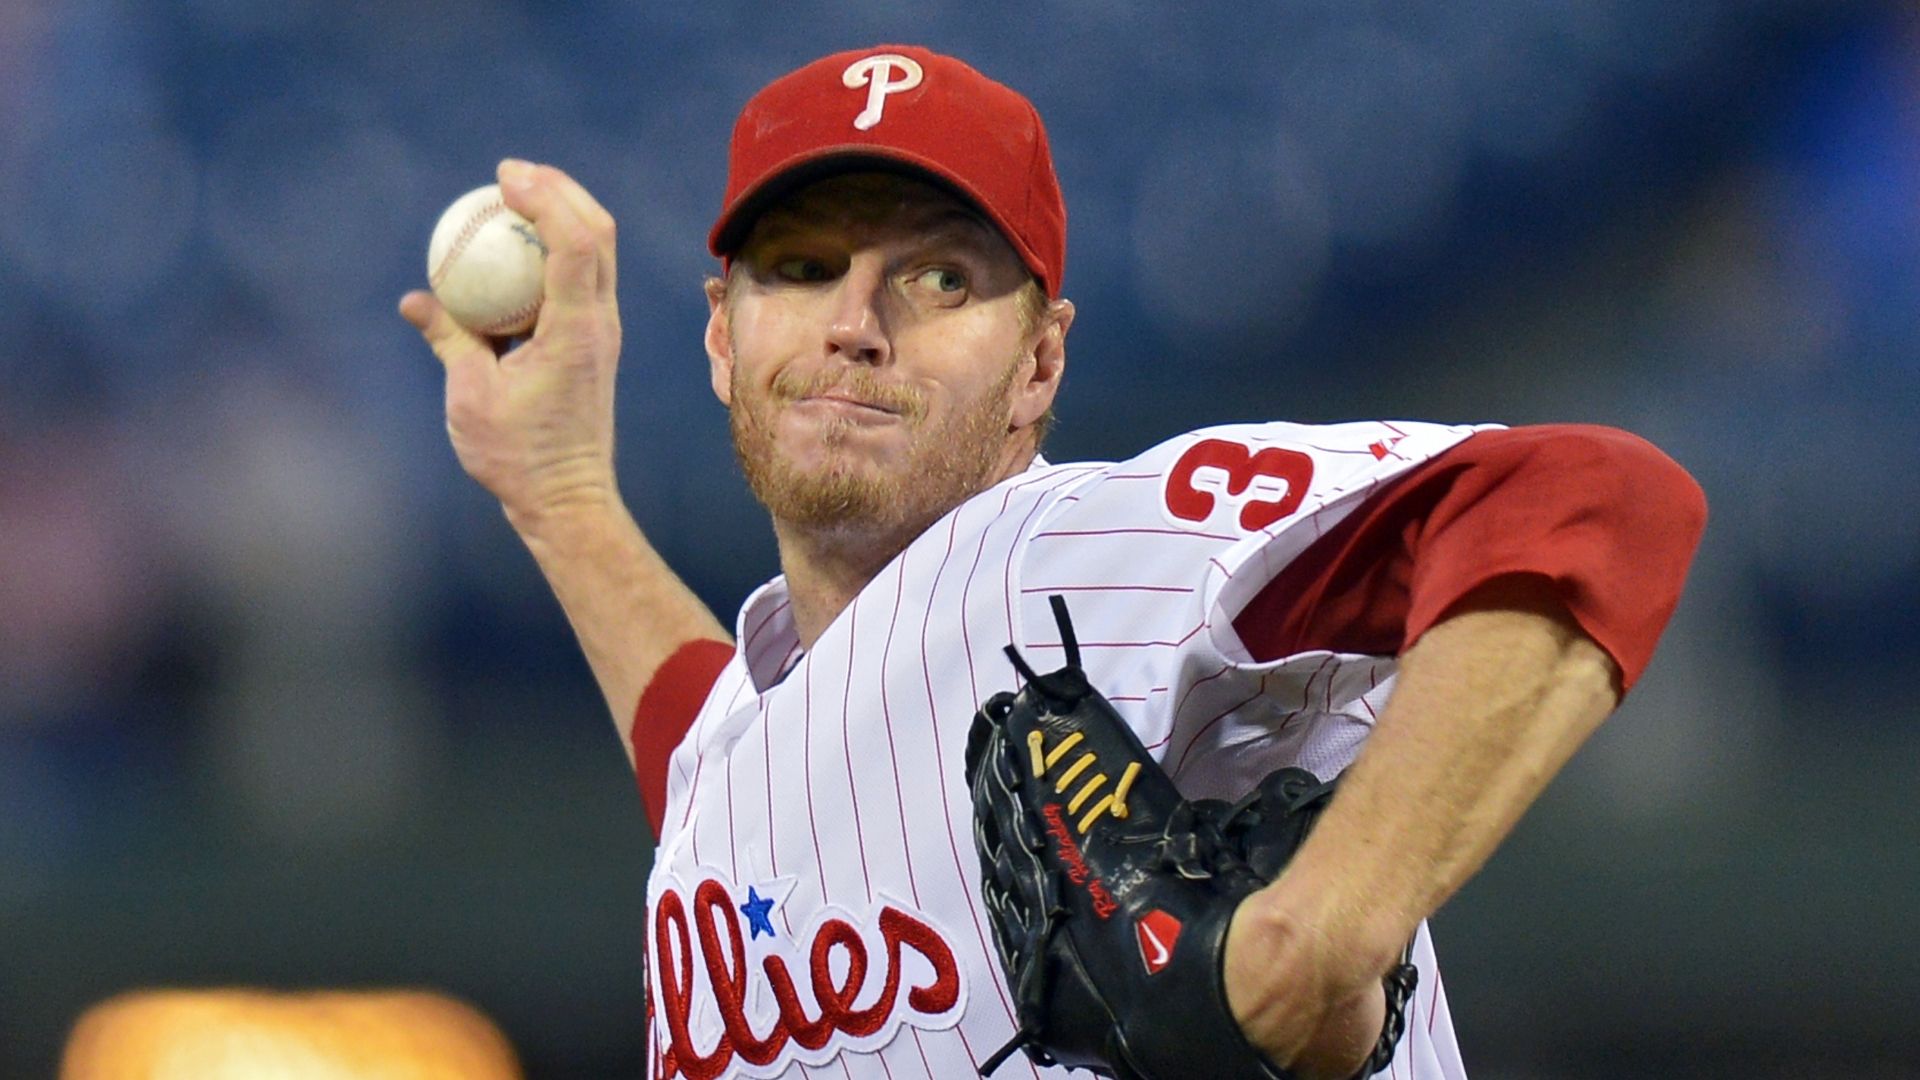 No hat logo for Roy Halladay's Hall of Fame plaque, Mike Mussina uncertain  – The Denver Post